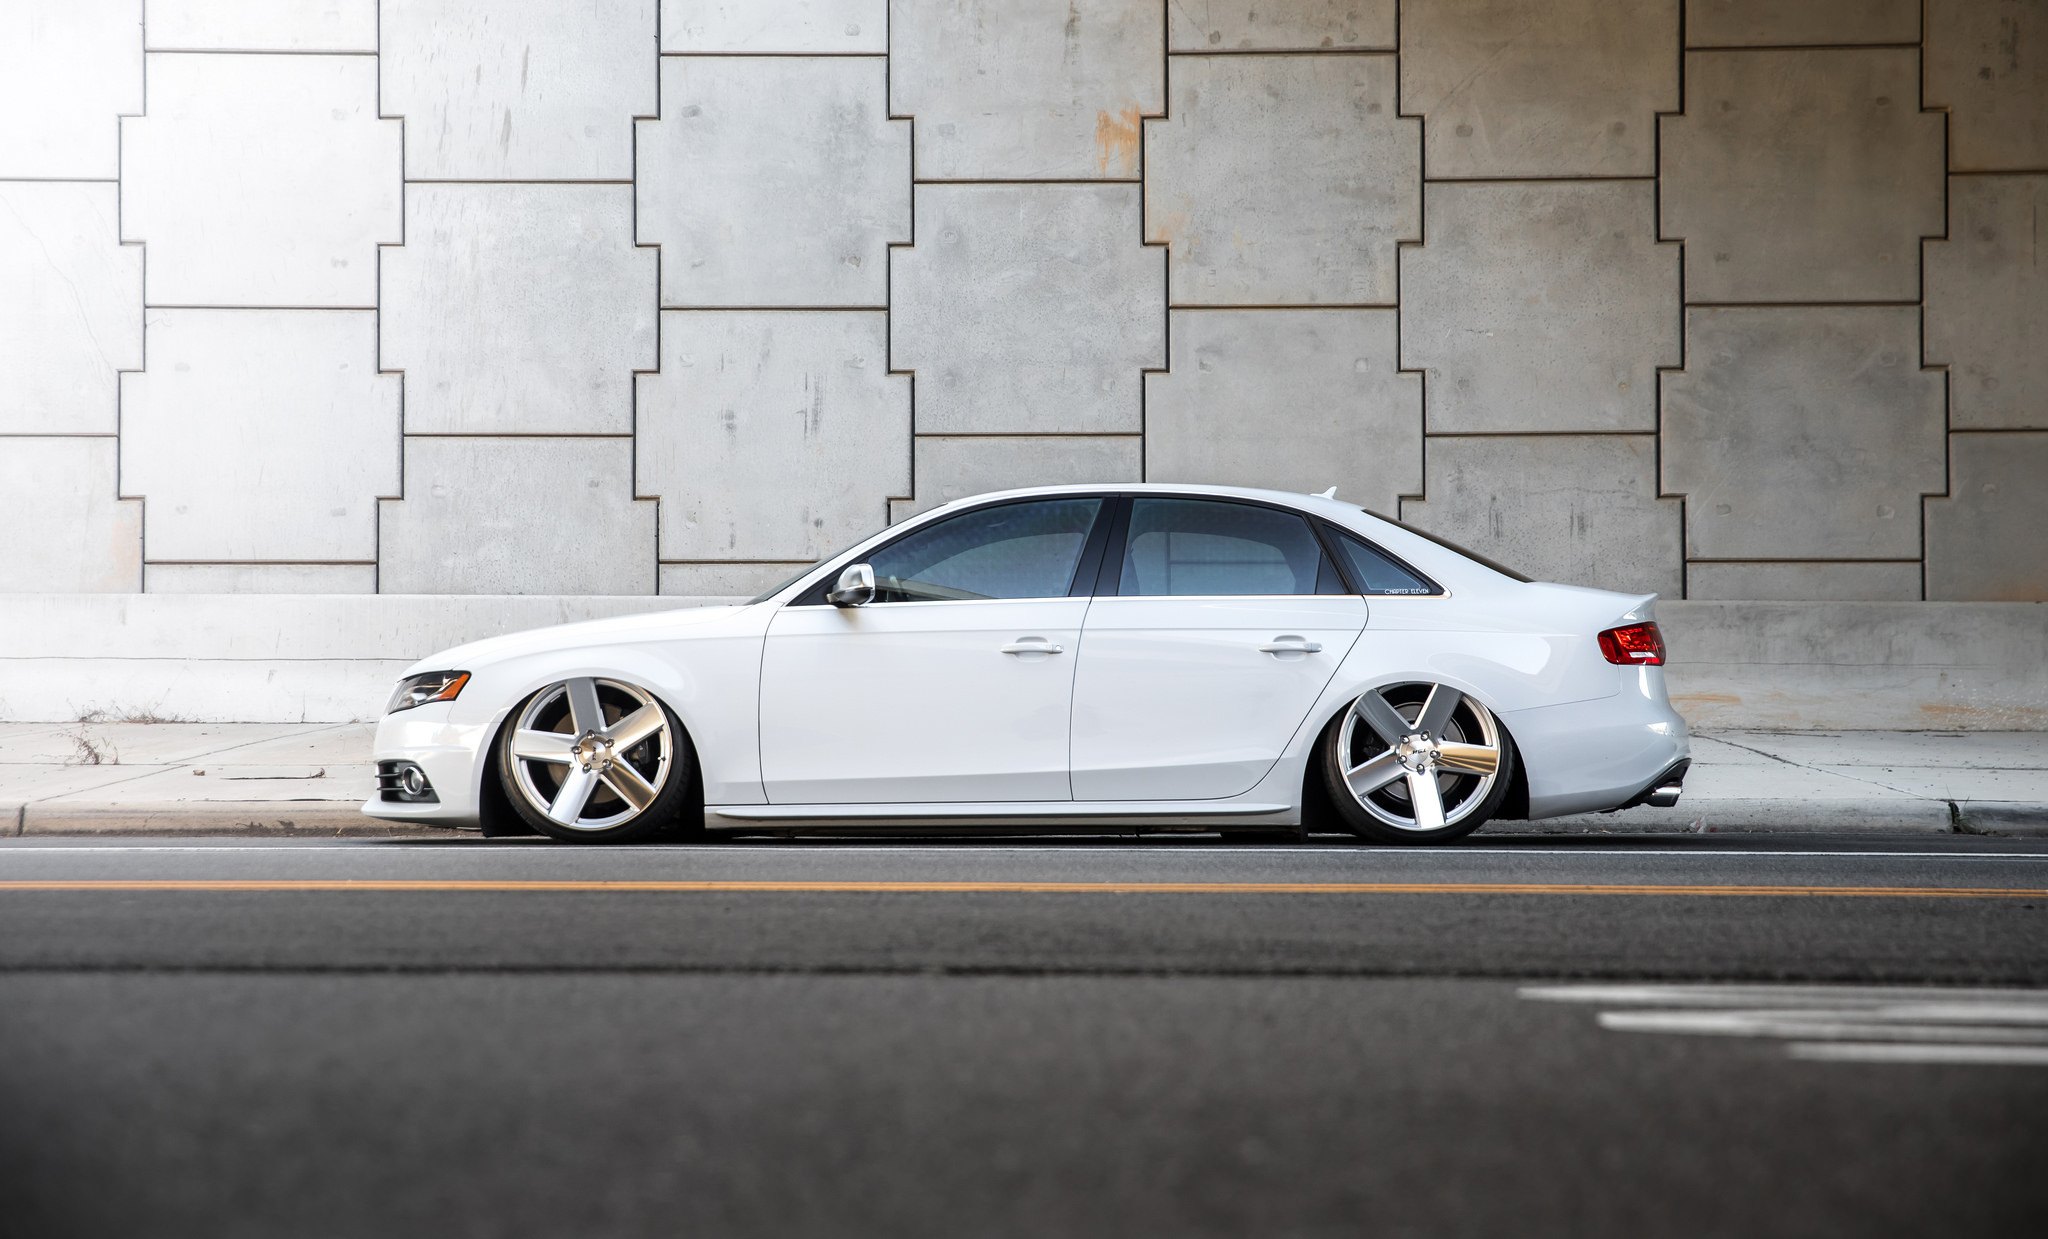 Aftermarket Side Skirts on White Lowered Audi S4 - Photo by TSW